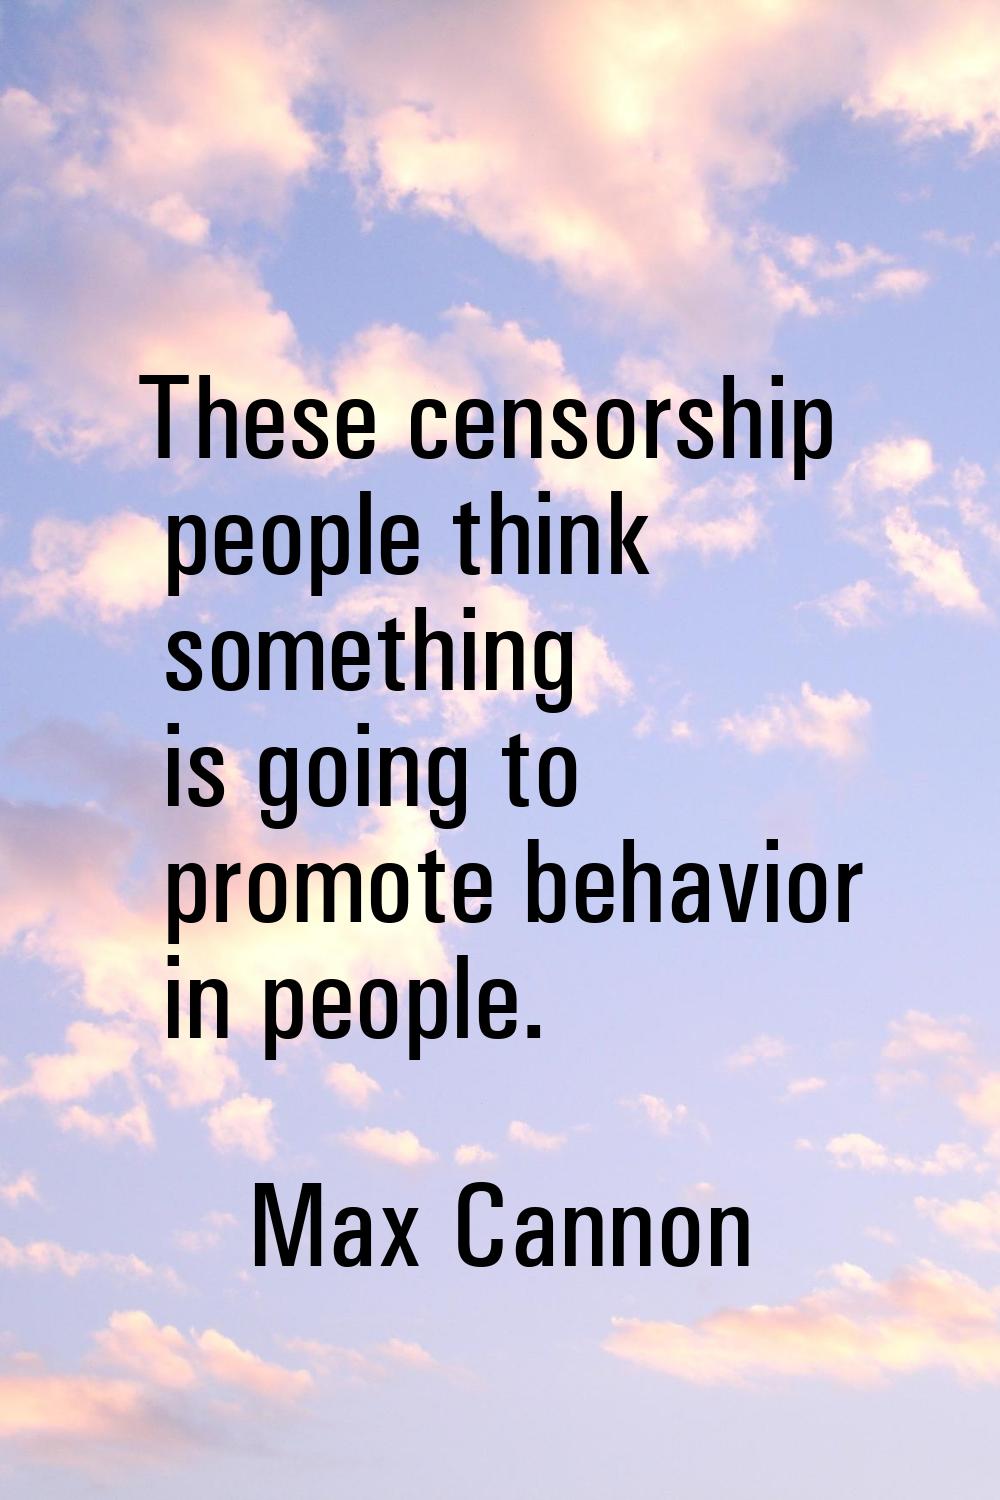 These censorship people think something is going to promote behavior in people.